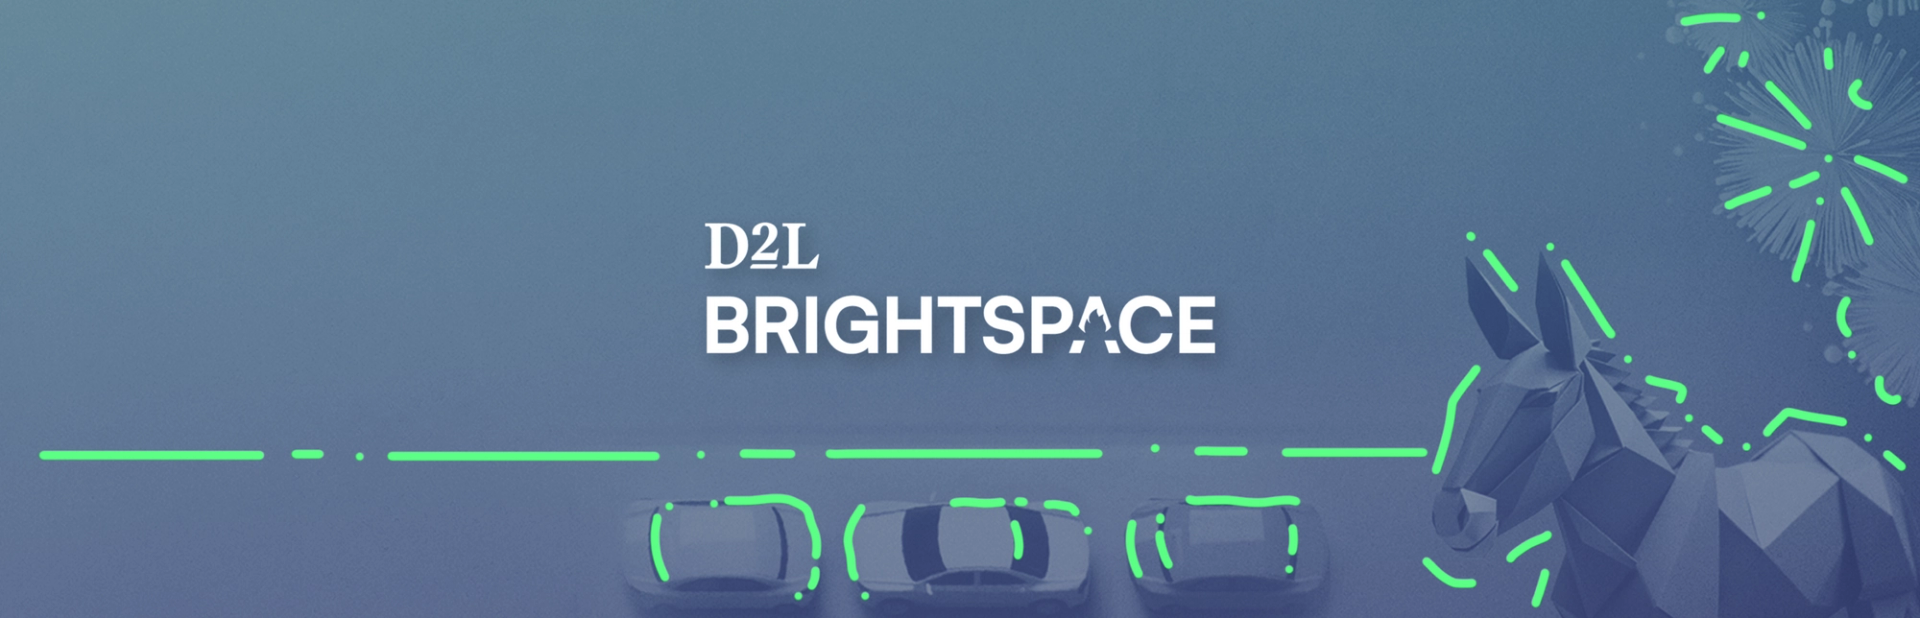 D2L Brightspace's Innovative AI-Powered Ad Campaign Redefines EdTech Marketing